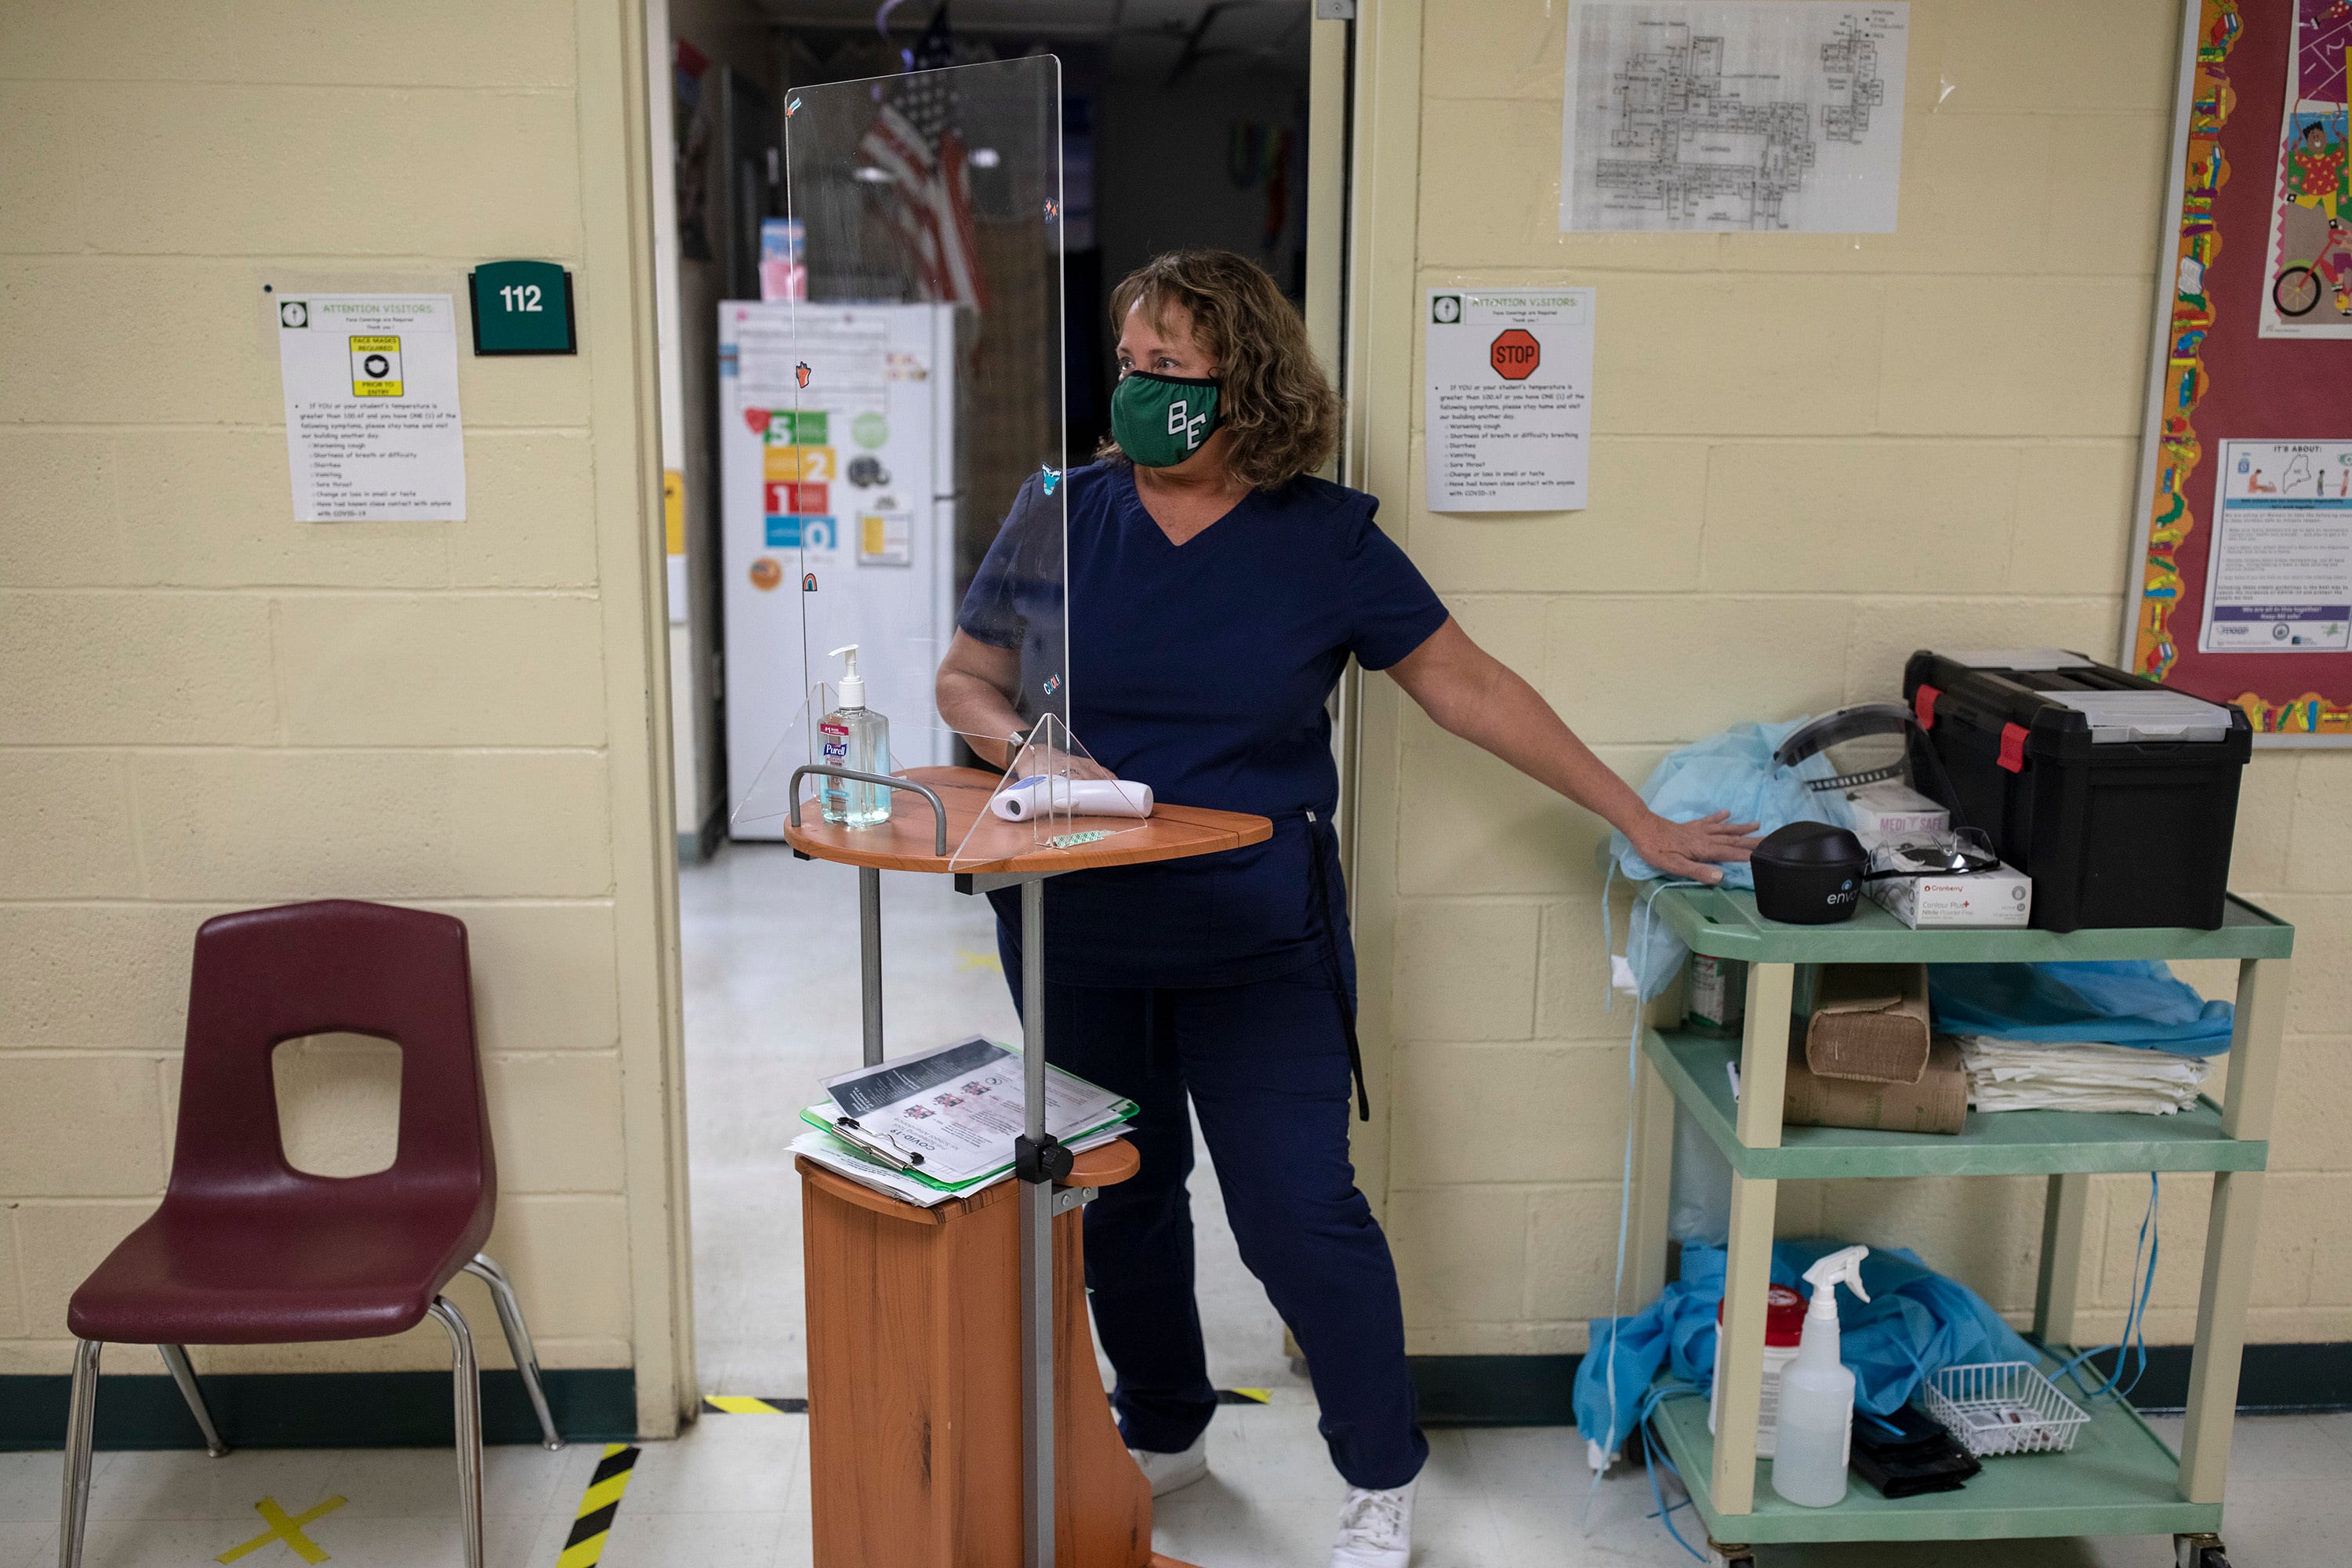 A masked school nurse in a uniform stands behind a clear plastic partition and a cart holding an instant-read thermometer and hand sanitizer, and next to a larger cart with cleaning supplies near the open door of an office. 